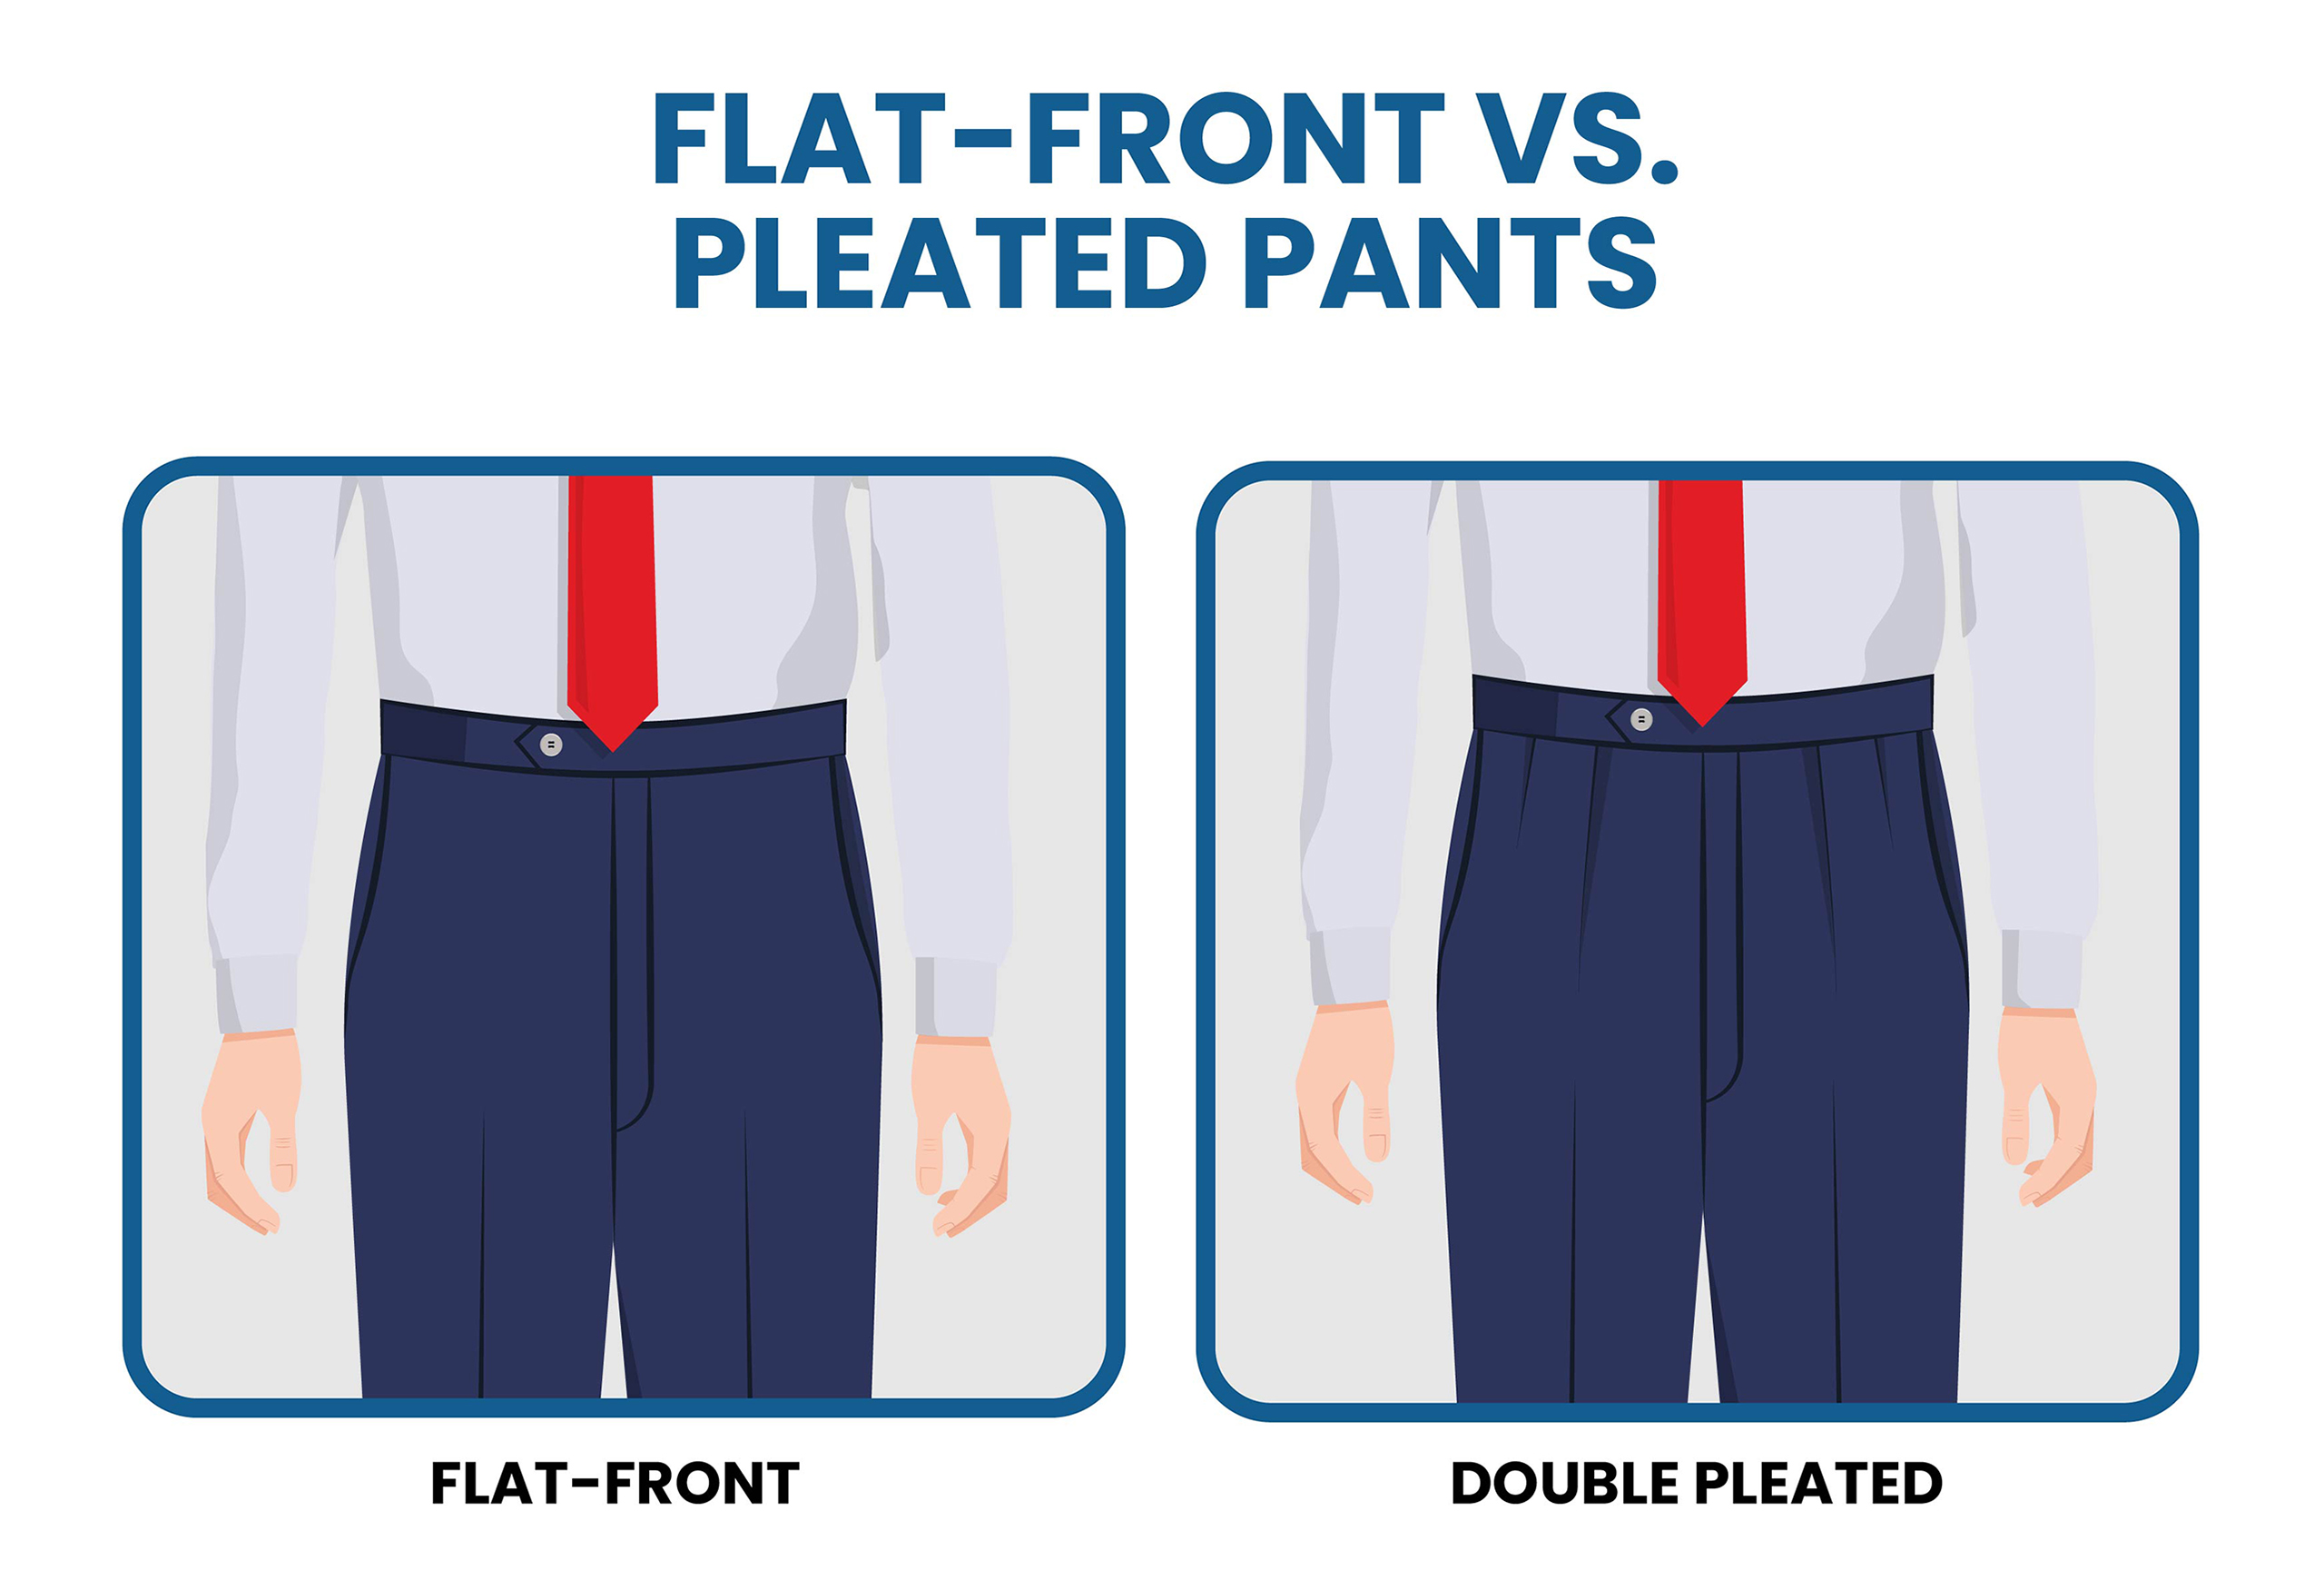 How To Tell If Your Suit Pants Fit Perfectly  The Senszio Fit Series